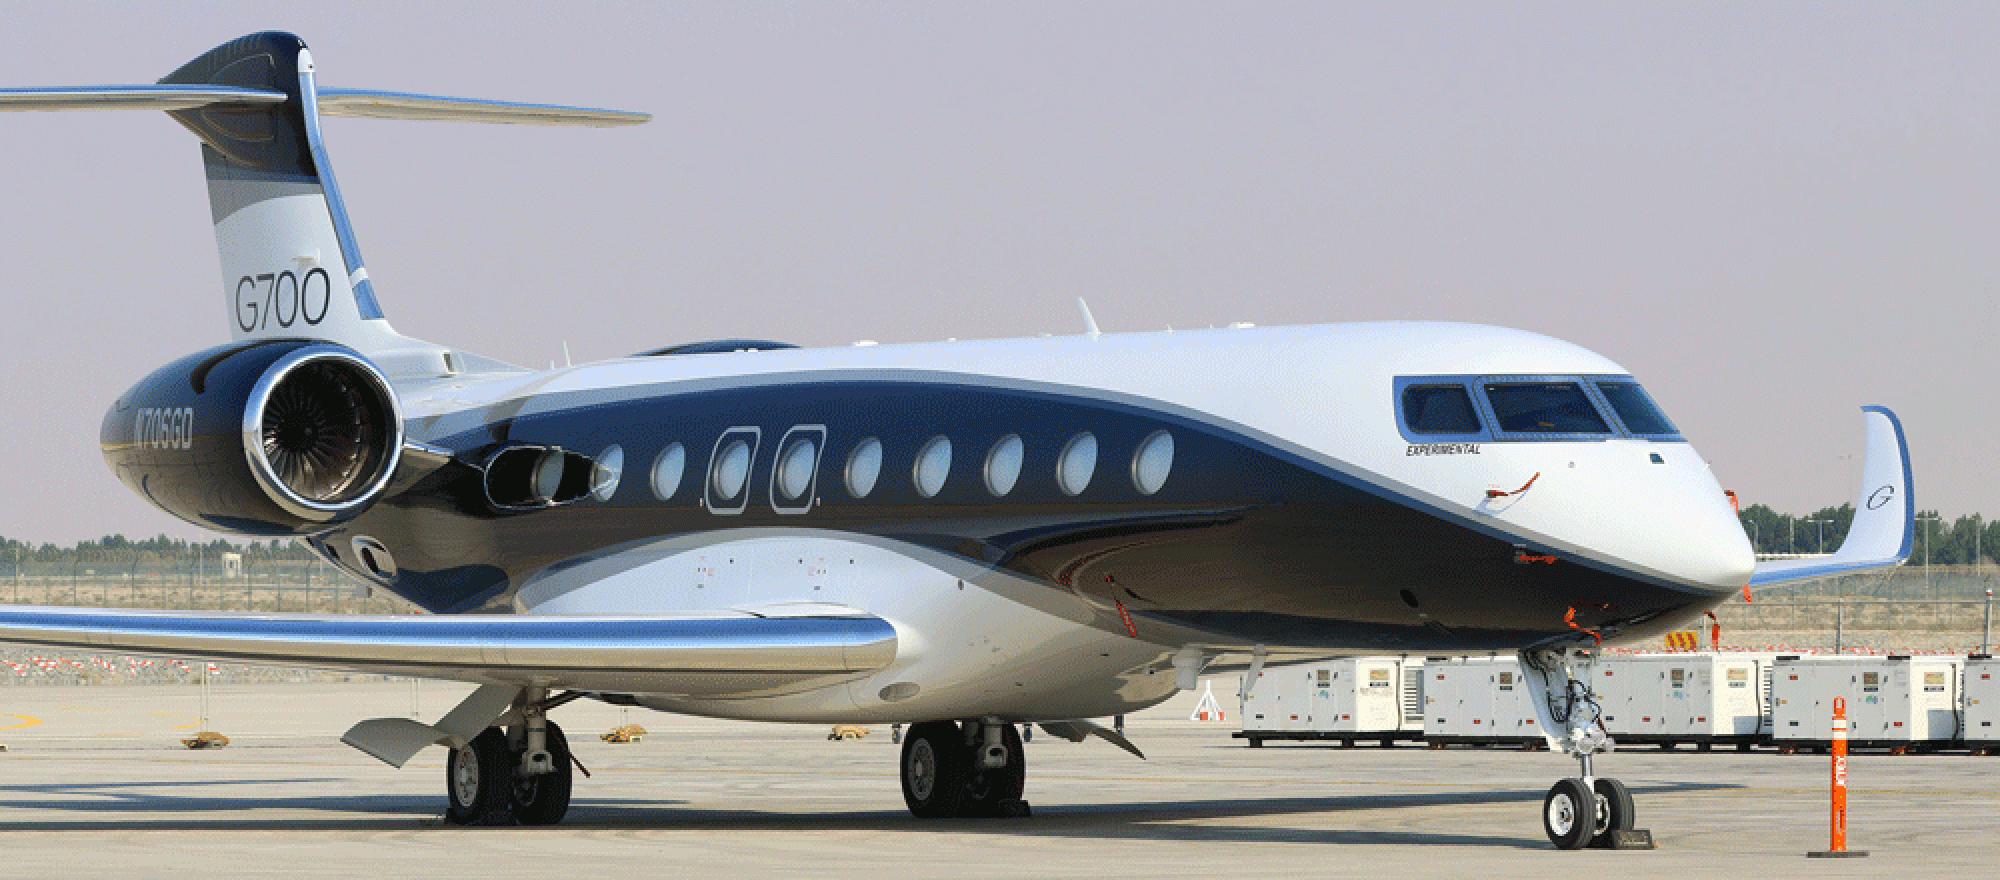 The ultra-long-range G700 parked on airport ramp